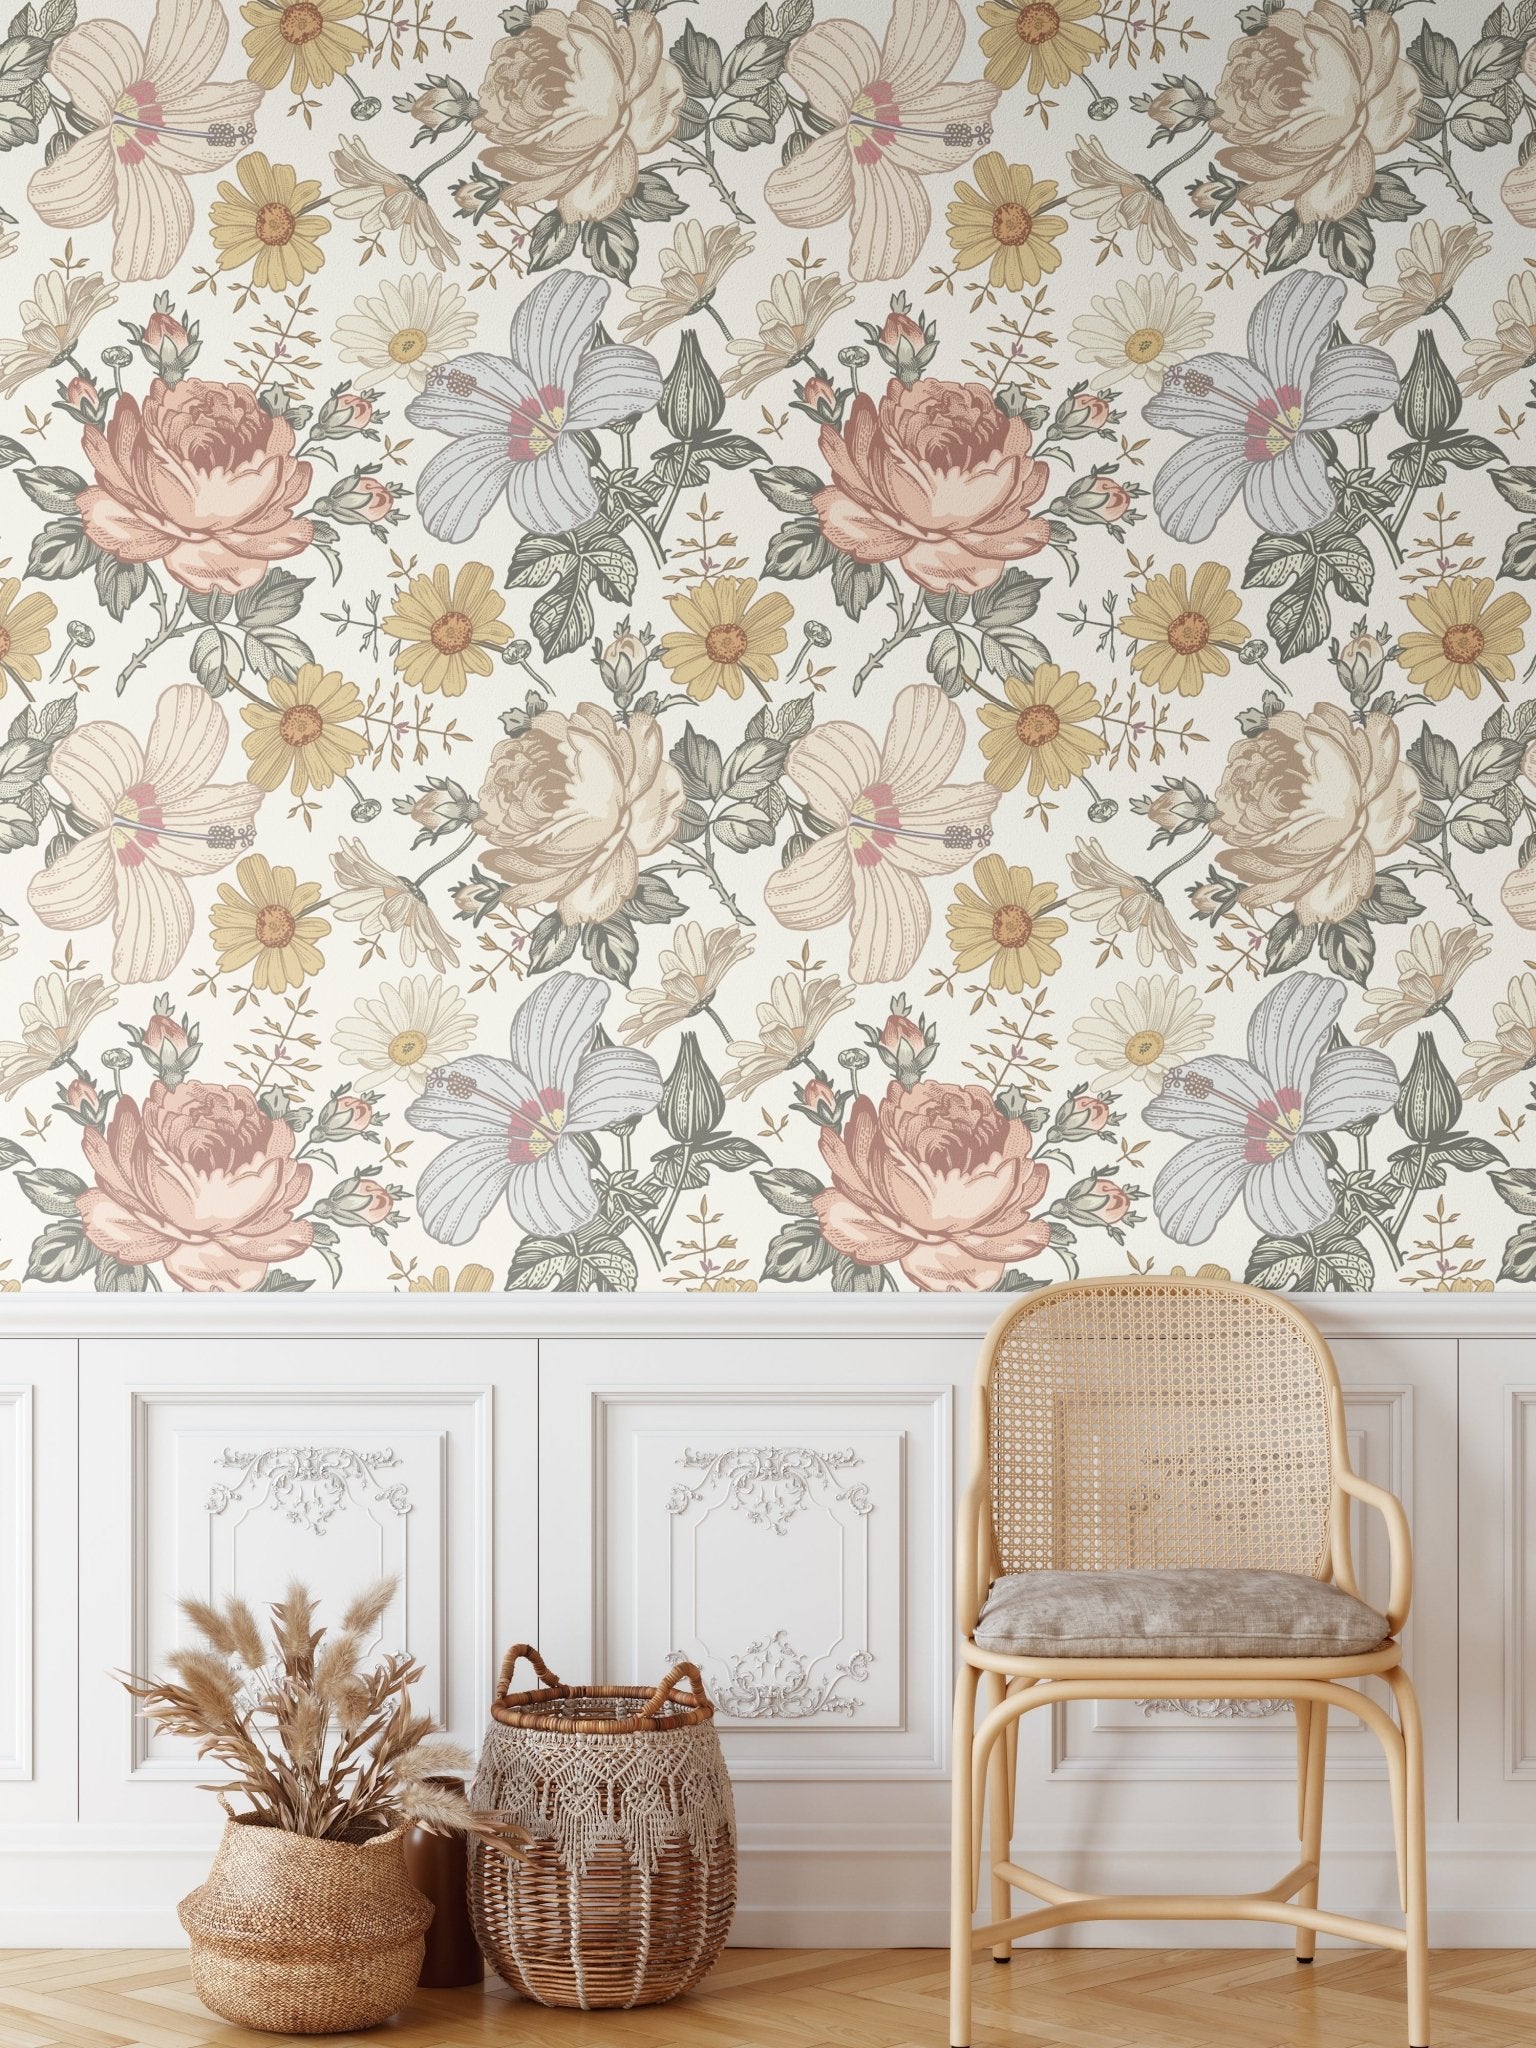 cute wallpaper, peel and stick, removable